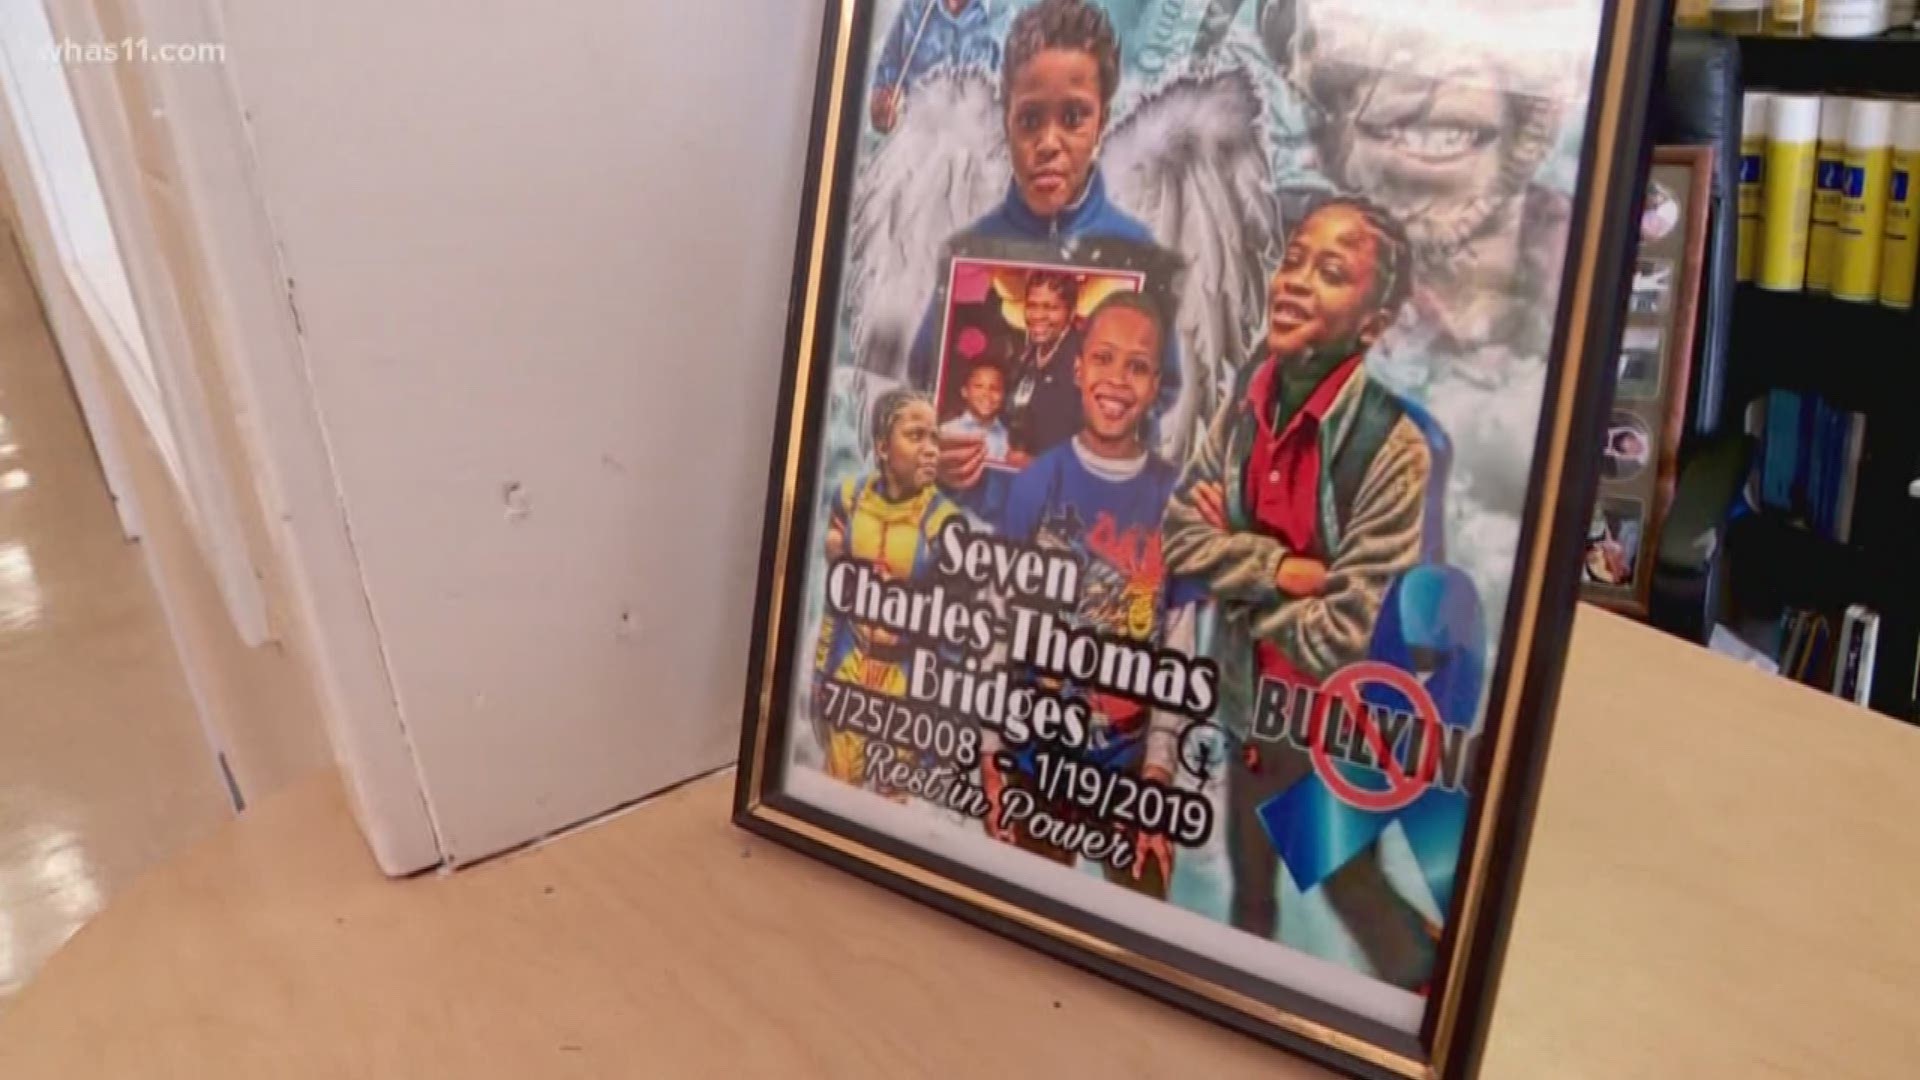 A 10-year-old suicide victim is being remembered nearly one week after the tragedy. Family members are hoping to use this tragedy to help other children.